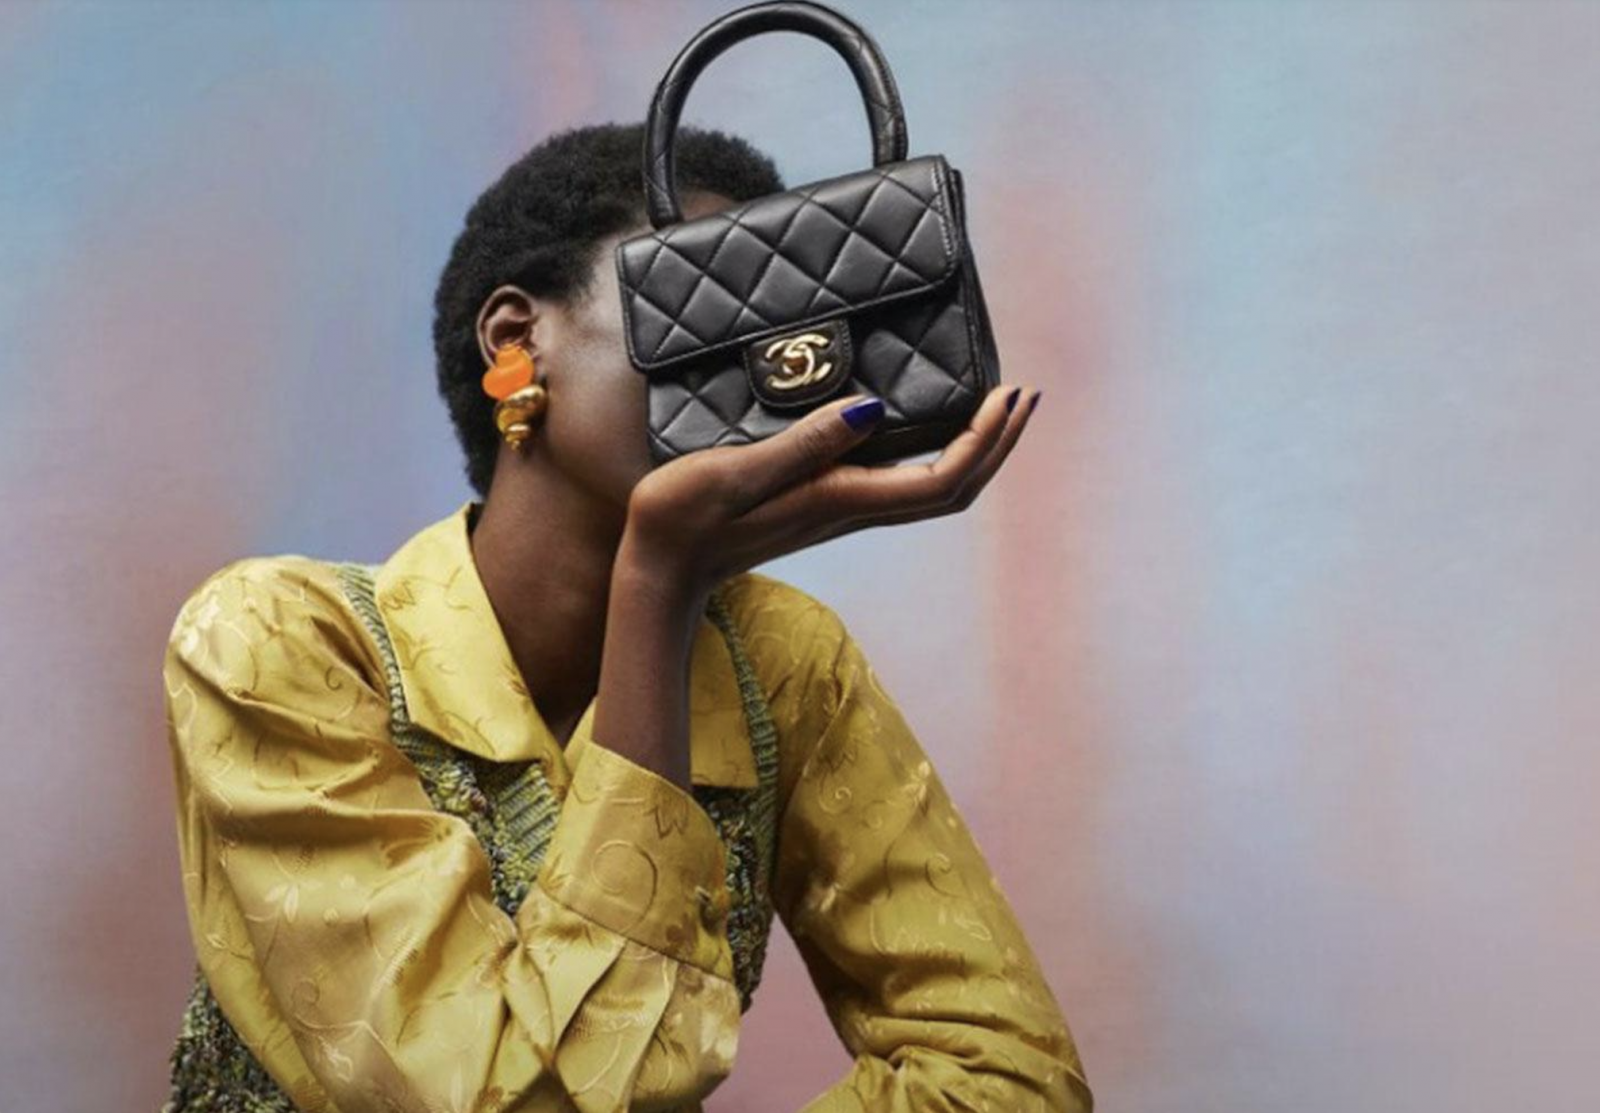 The most valued French brands: luxury dominates the ranking - Brandon  Valorisation